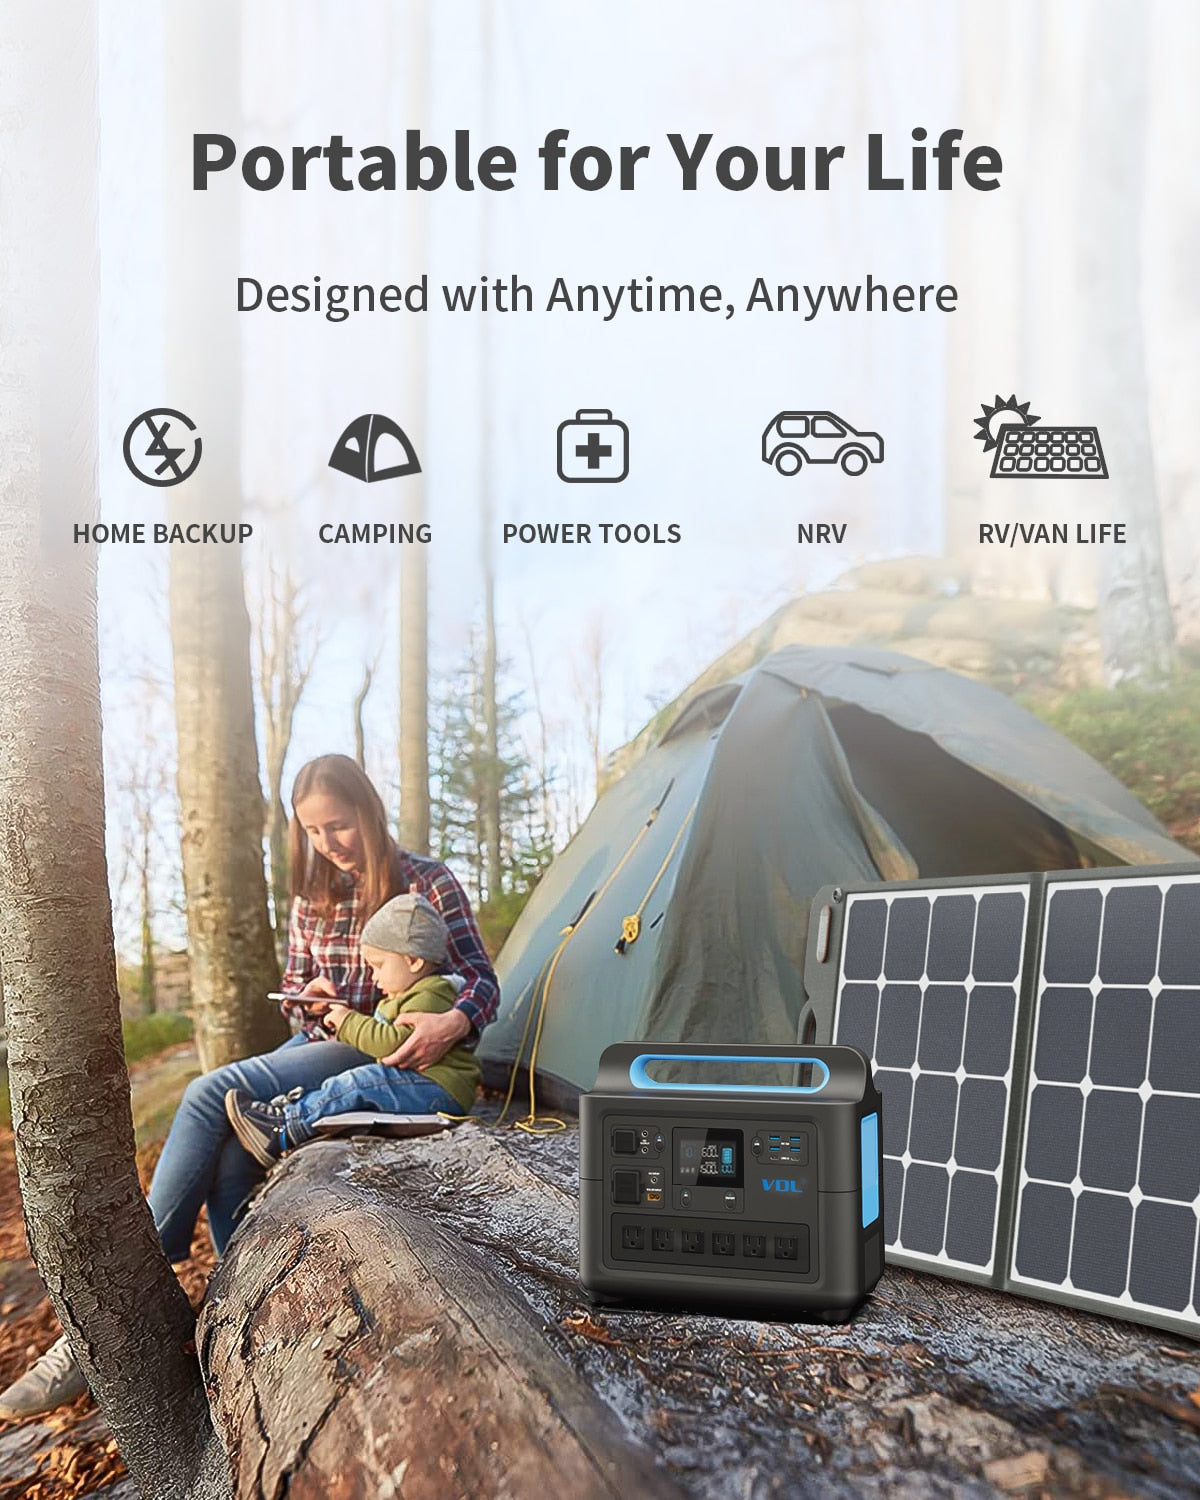 VDL Portable Power Station 1228Wh/1500W, 120V-220V Pure Sinewave AC Outlets powerful power bank for Home Use Outdoor Camping RV